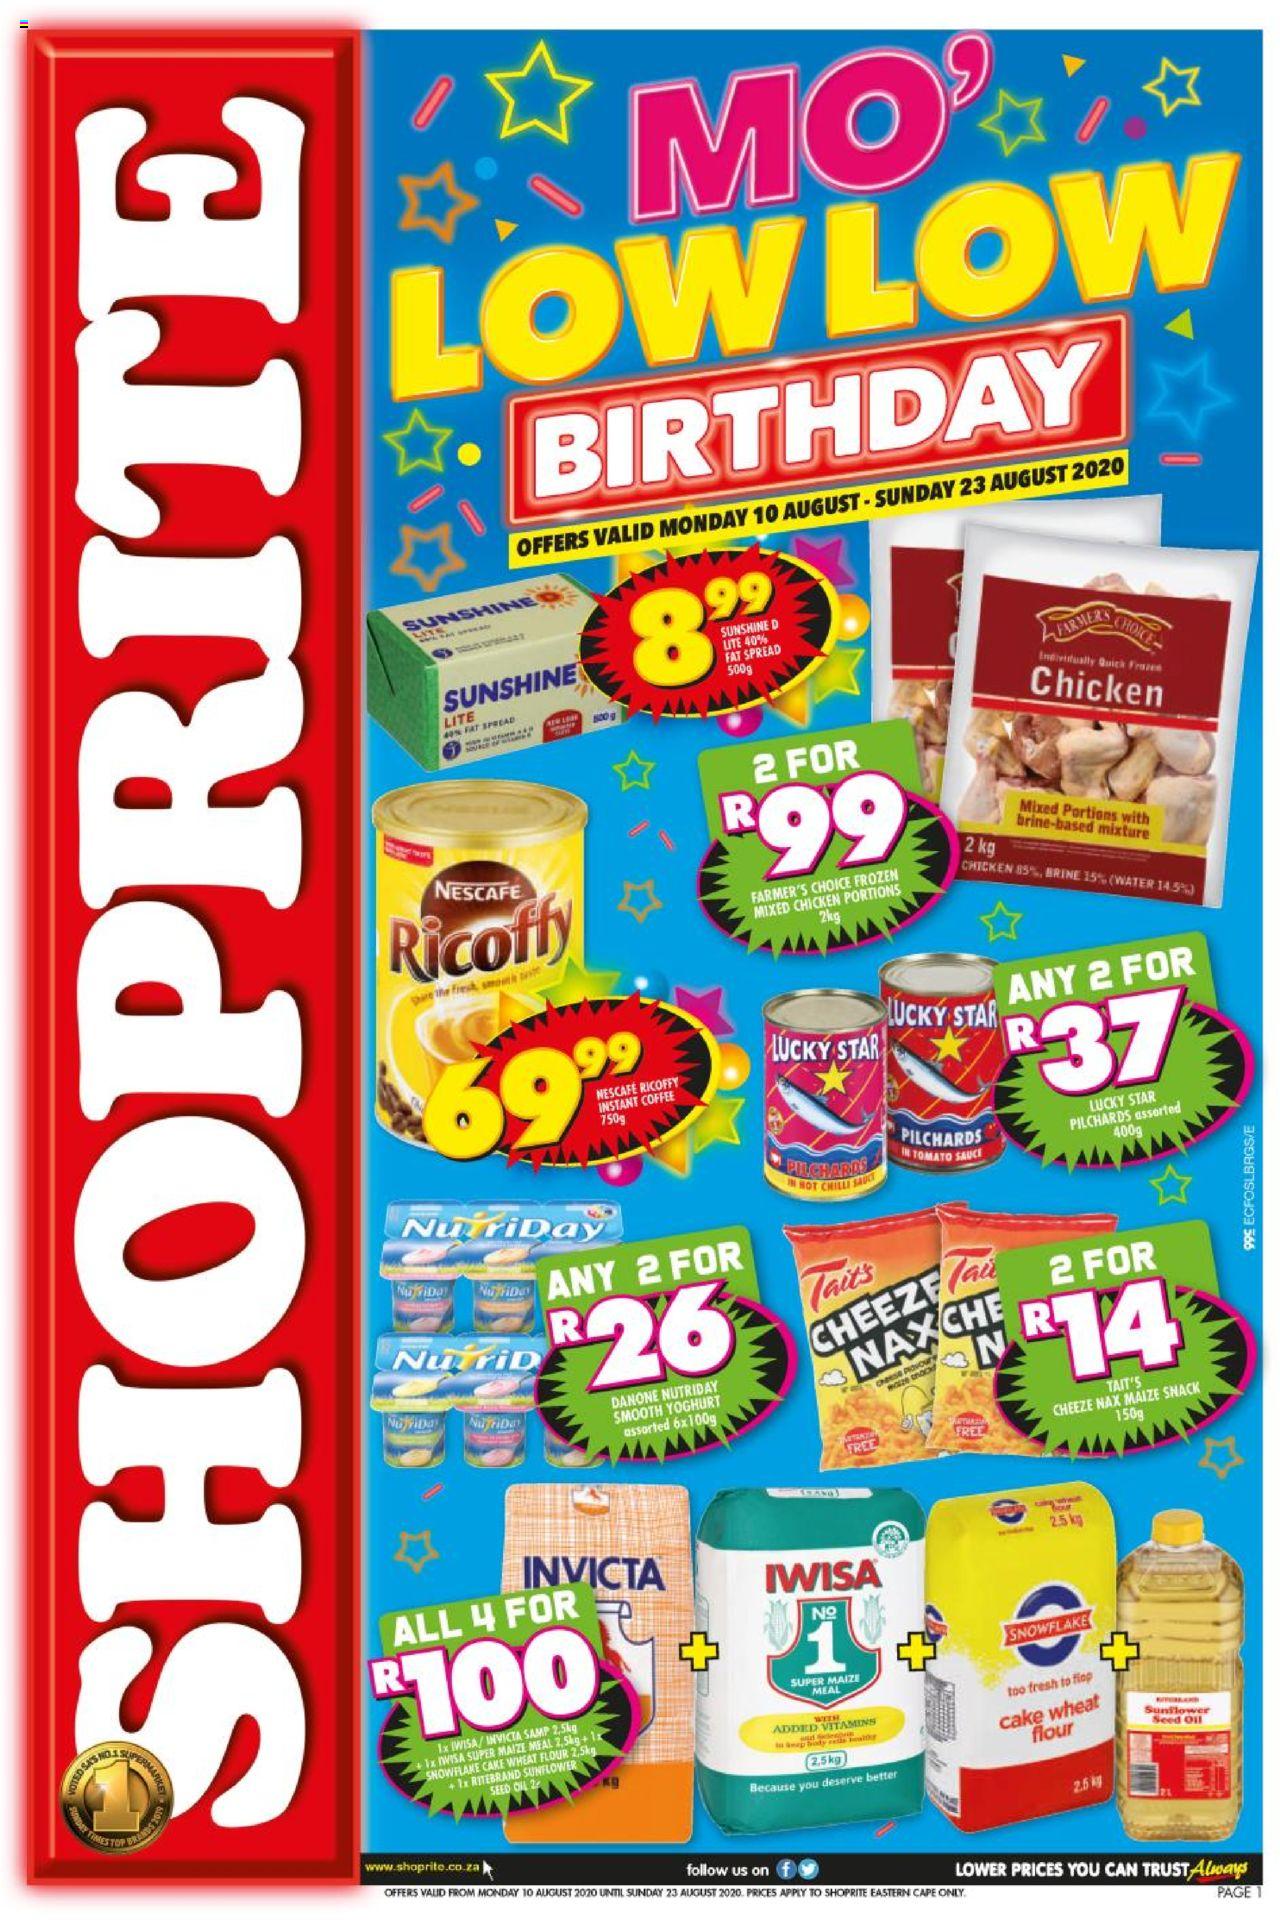 Shoprite Specials Mo Low Low Birthday 10 August 2020